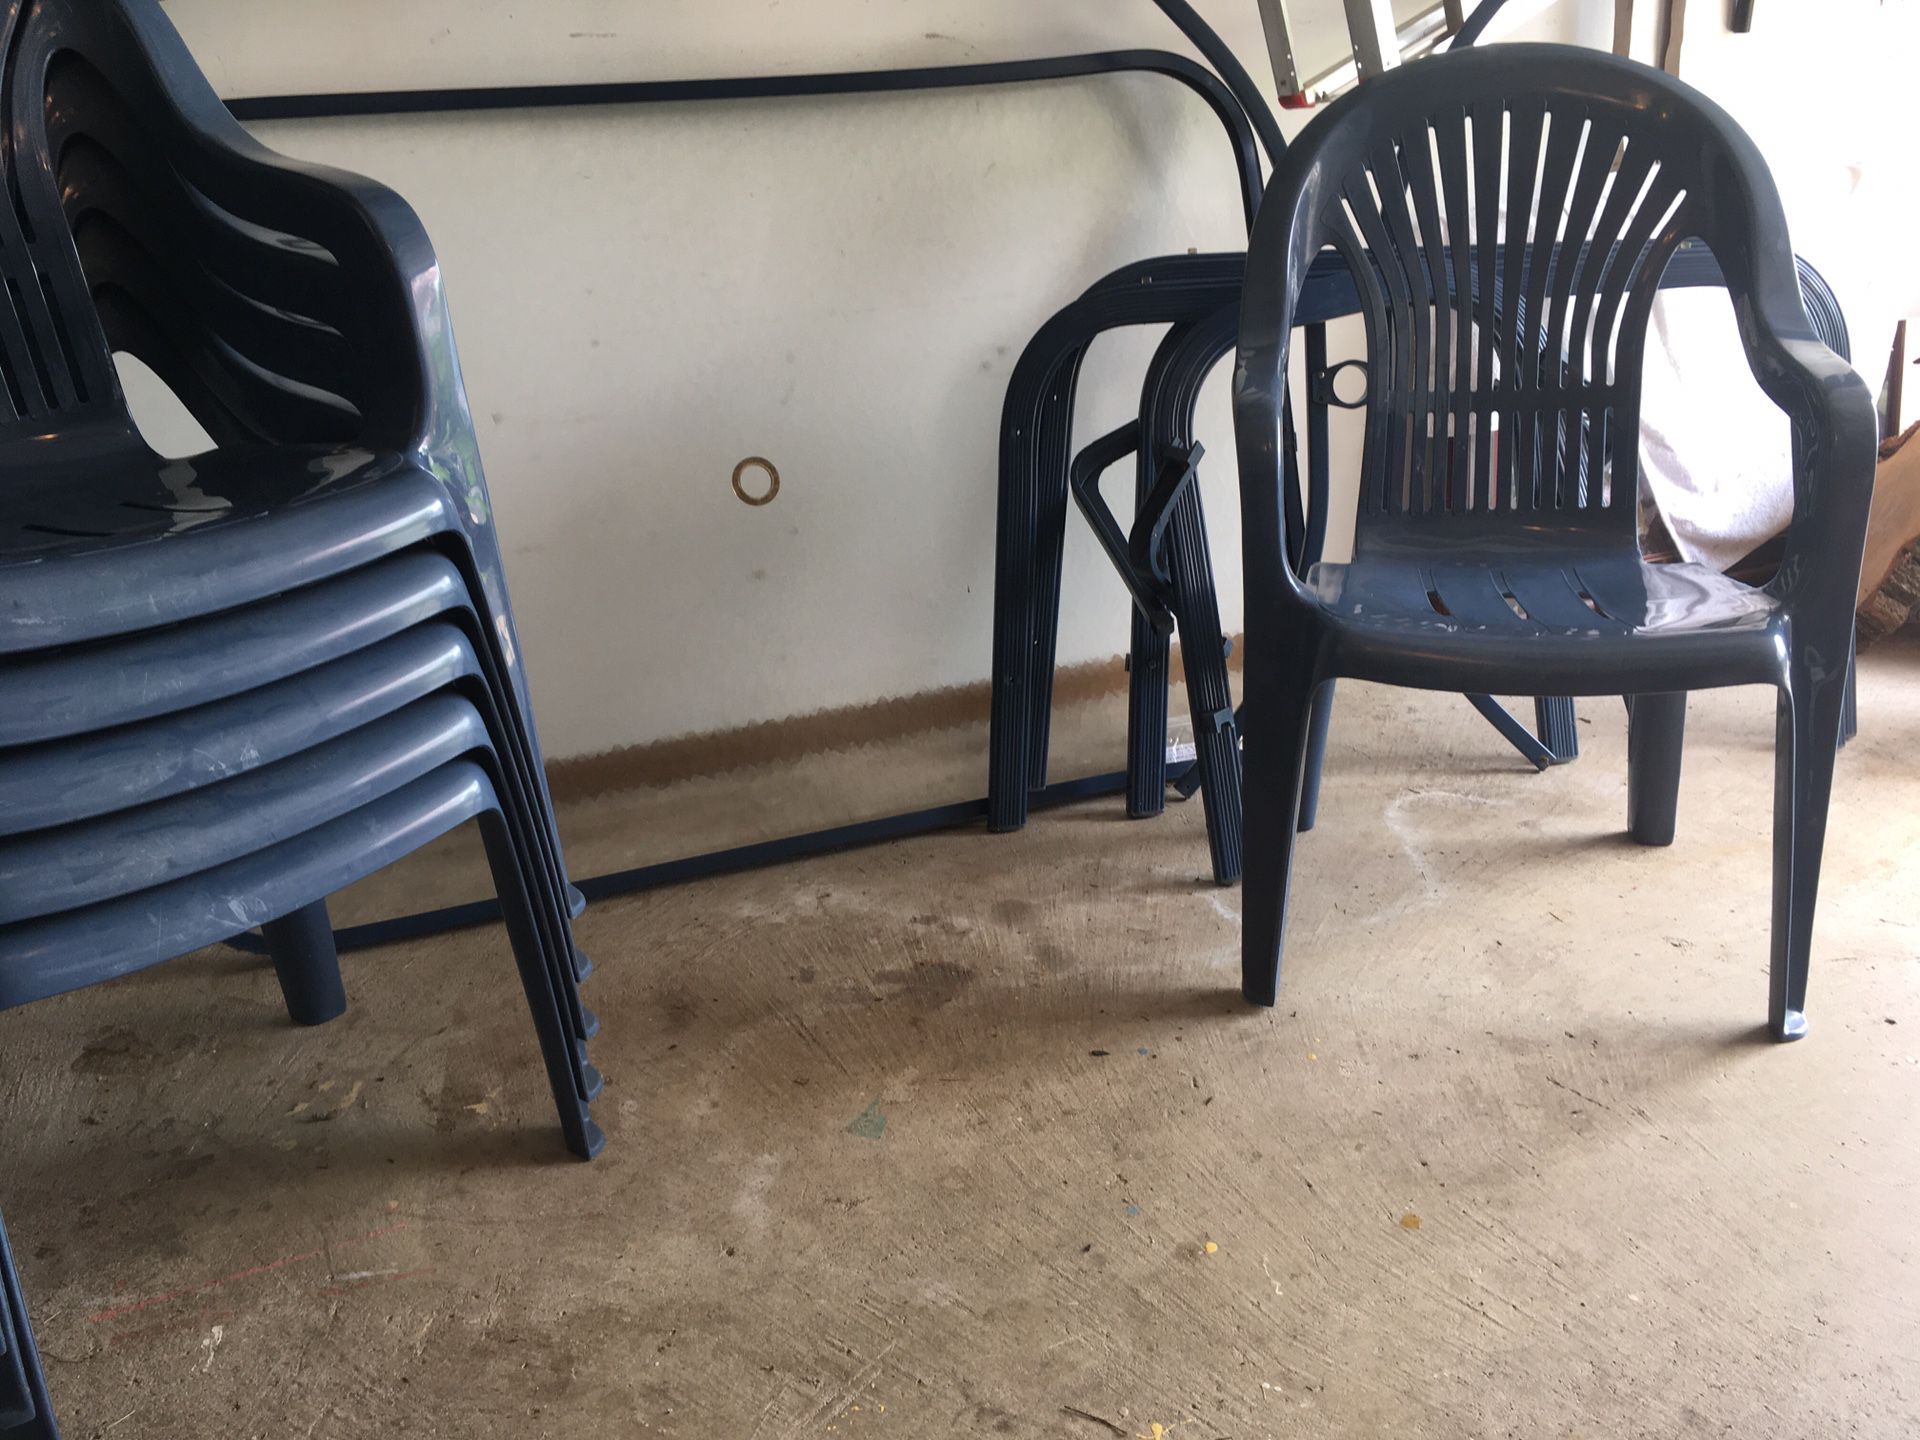 Patio Furniture - Table (38”w  x 60” L), 6 Chairs  table top is plexiglass w/blue  trim & chairs are blue. Table is easy to assemble & store 